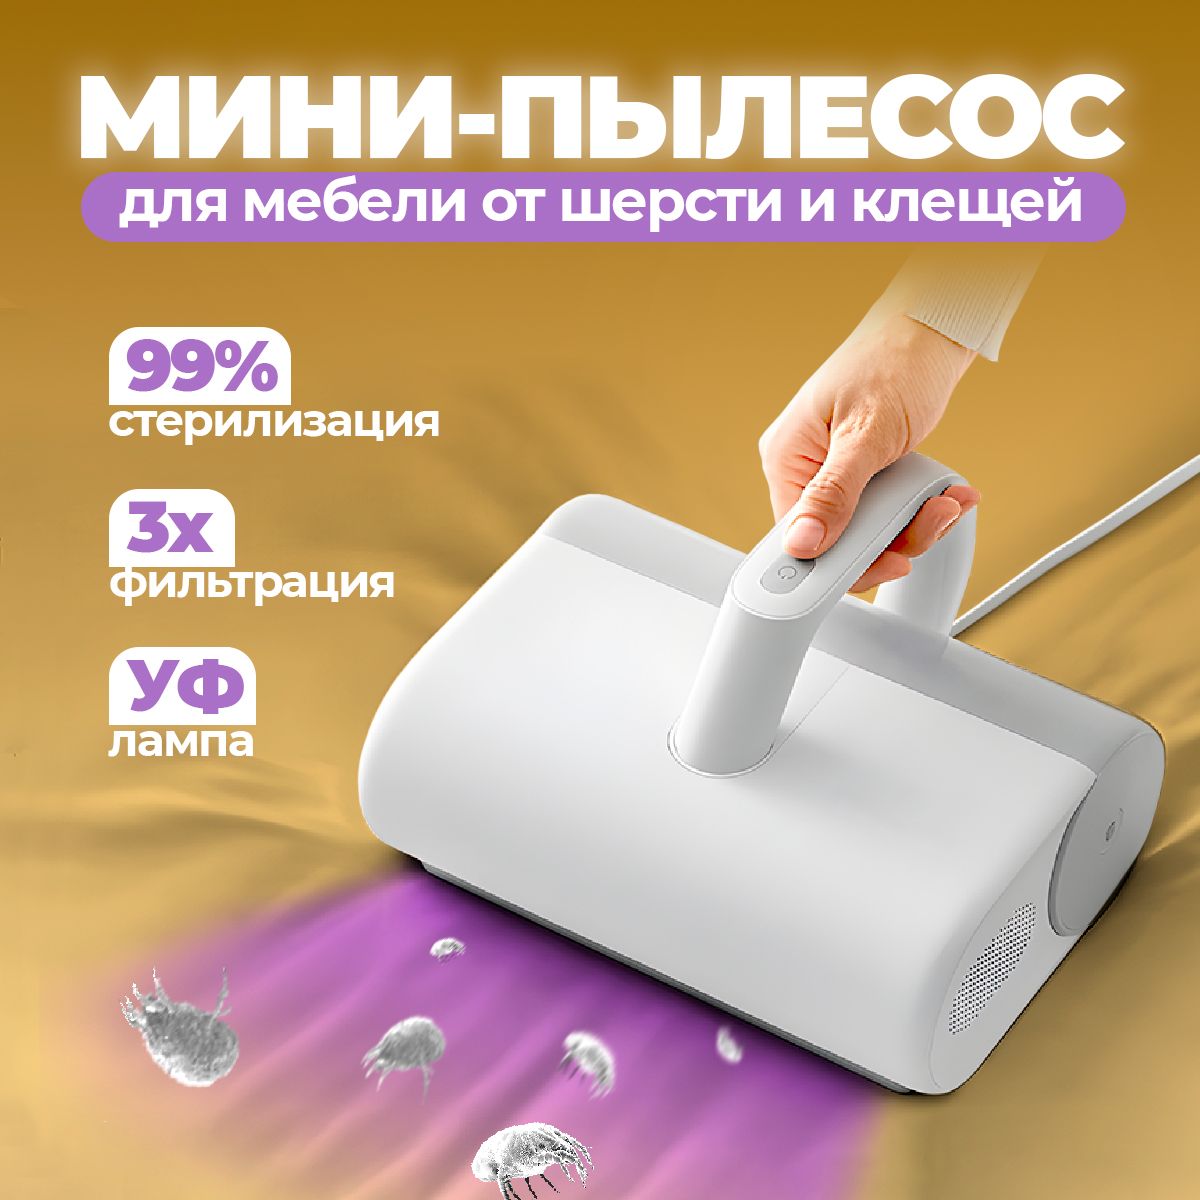 Mjcmy01dy dust mite vacuum cleaner. Xiaomi Dust Mite Vacuum. Xiaomi Dust Mite Vacuum вилка. Xiaomi Mijia Dust Mite Vacuum Cleaner.